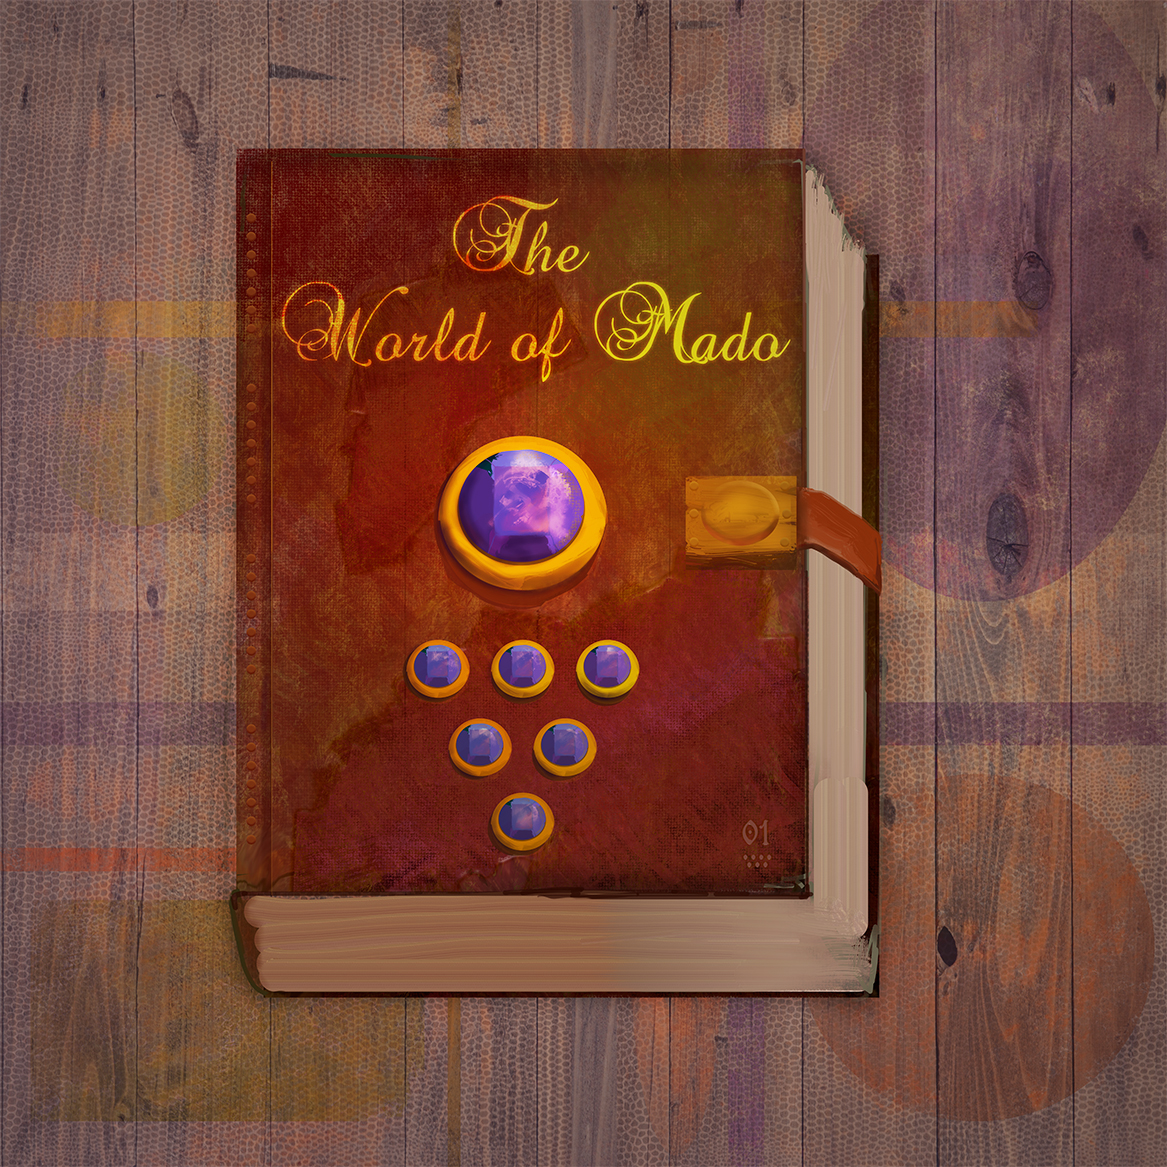 Magic book of the world of mado by Nusja